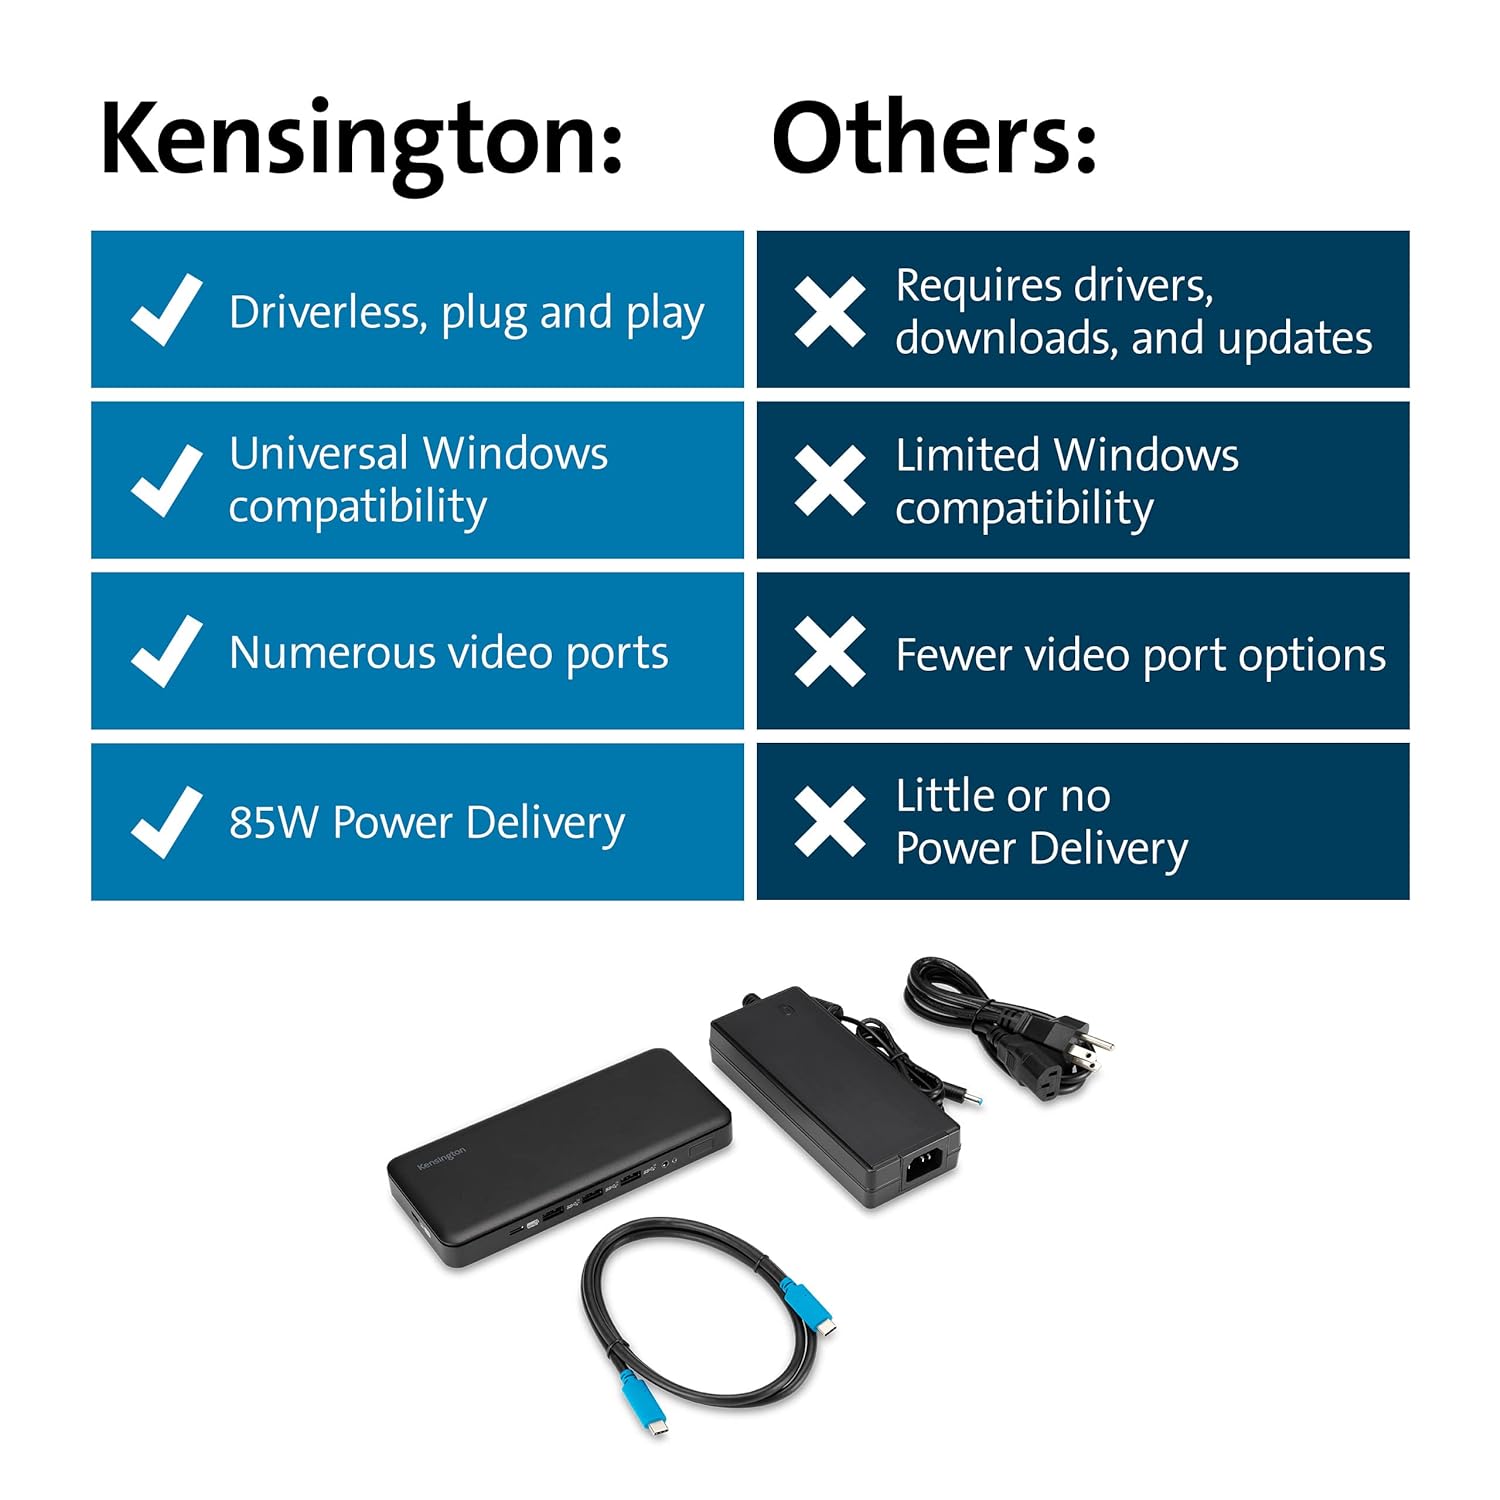 Kensington SD4839P USB-C 10Gbps Triple Video Driverless Docking Station via DP and HDMI Ports with 85W Power Delivery for Windows and USB-C Laptops (K33480NA)